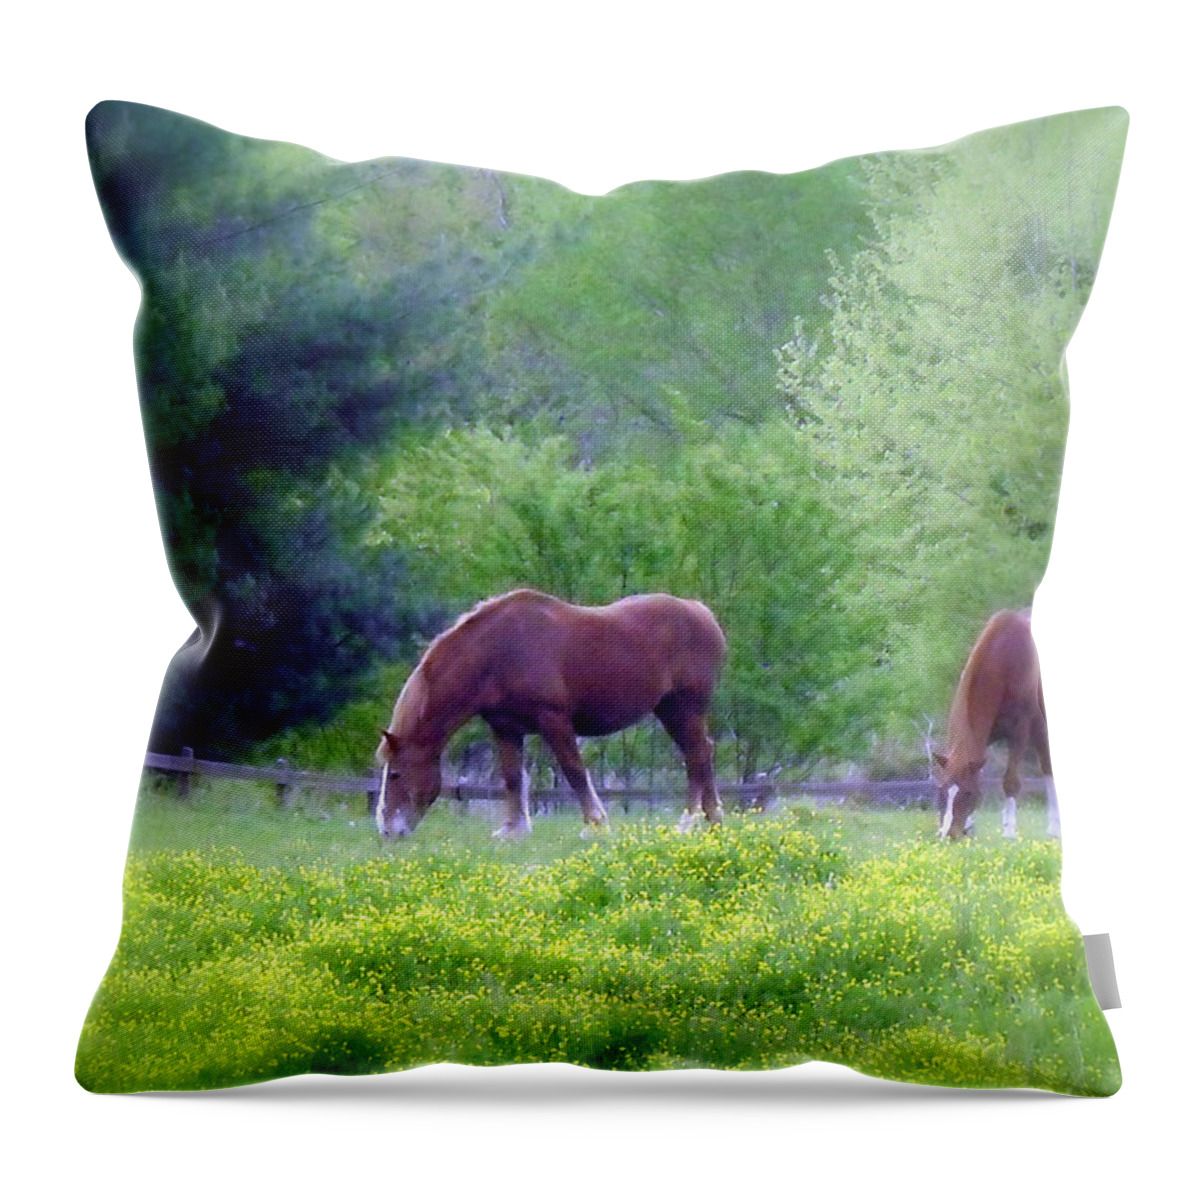 Horse Throw Pillow featuring the photograph Out To Pasture by Jodie Marie Anne Richardson Traugott     aka jm-ART